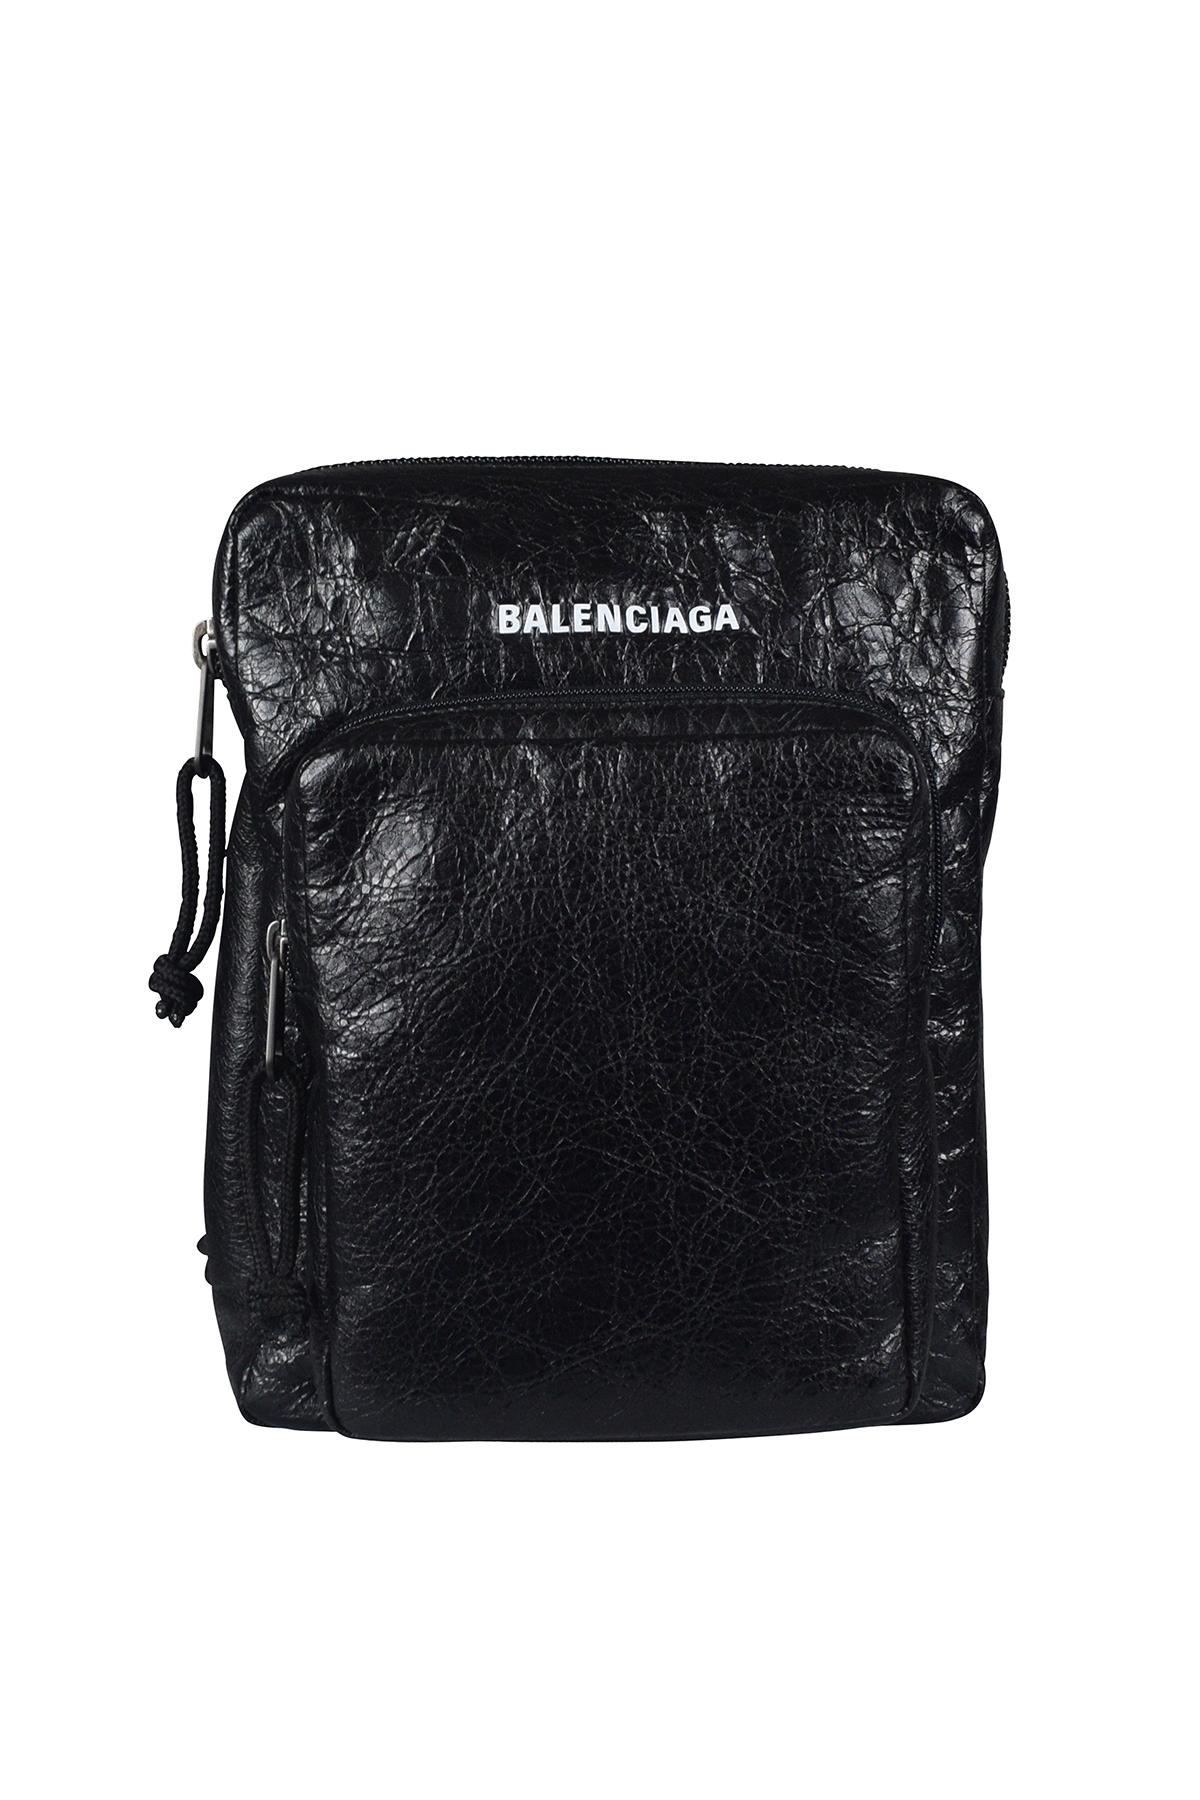 Balenciaga Leather Explorer Pouch in Black for Men - Lyst